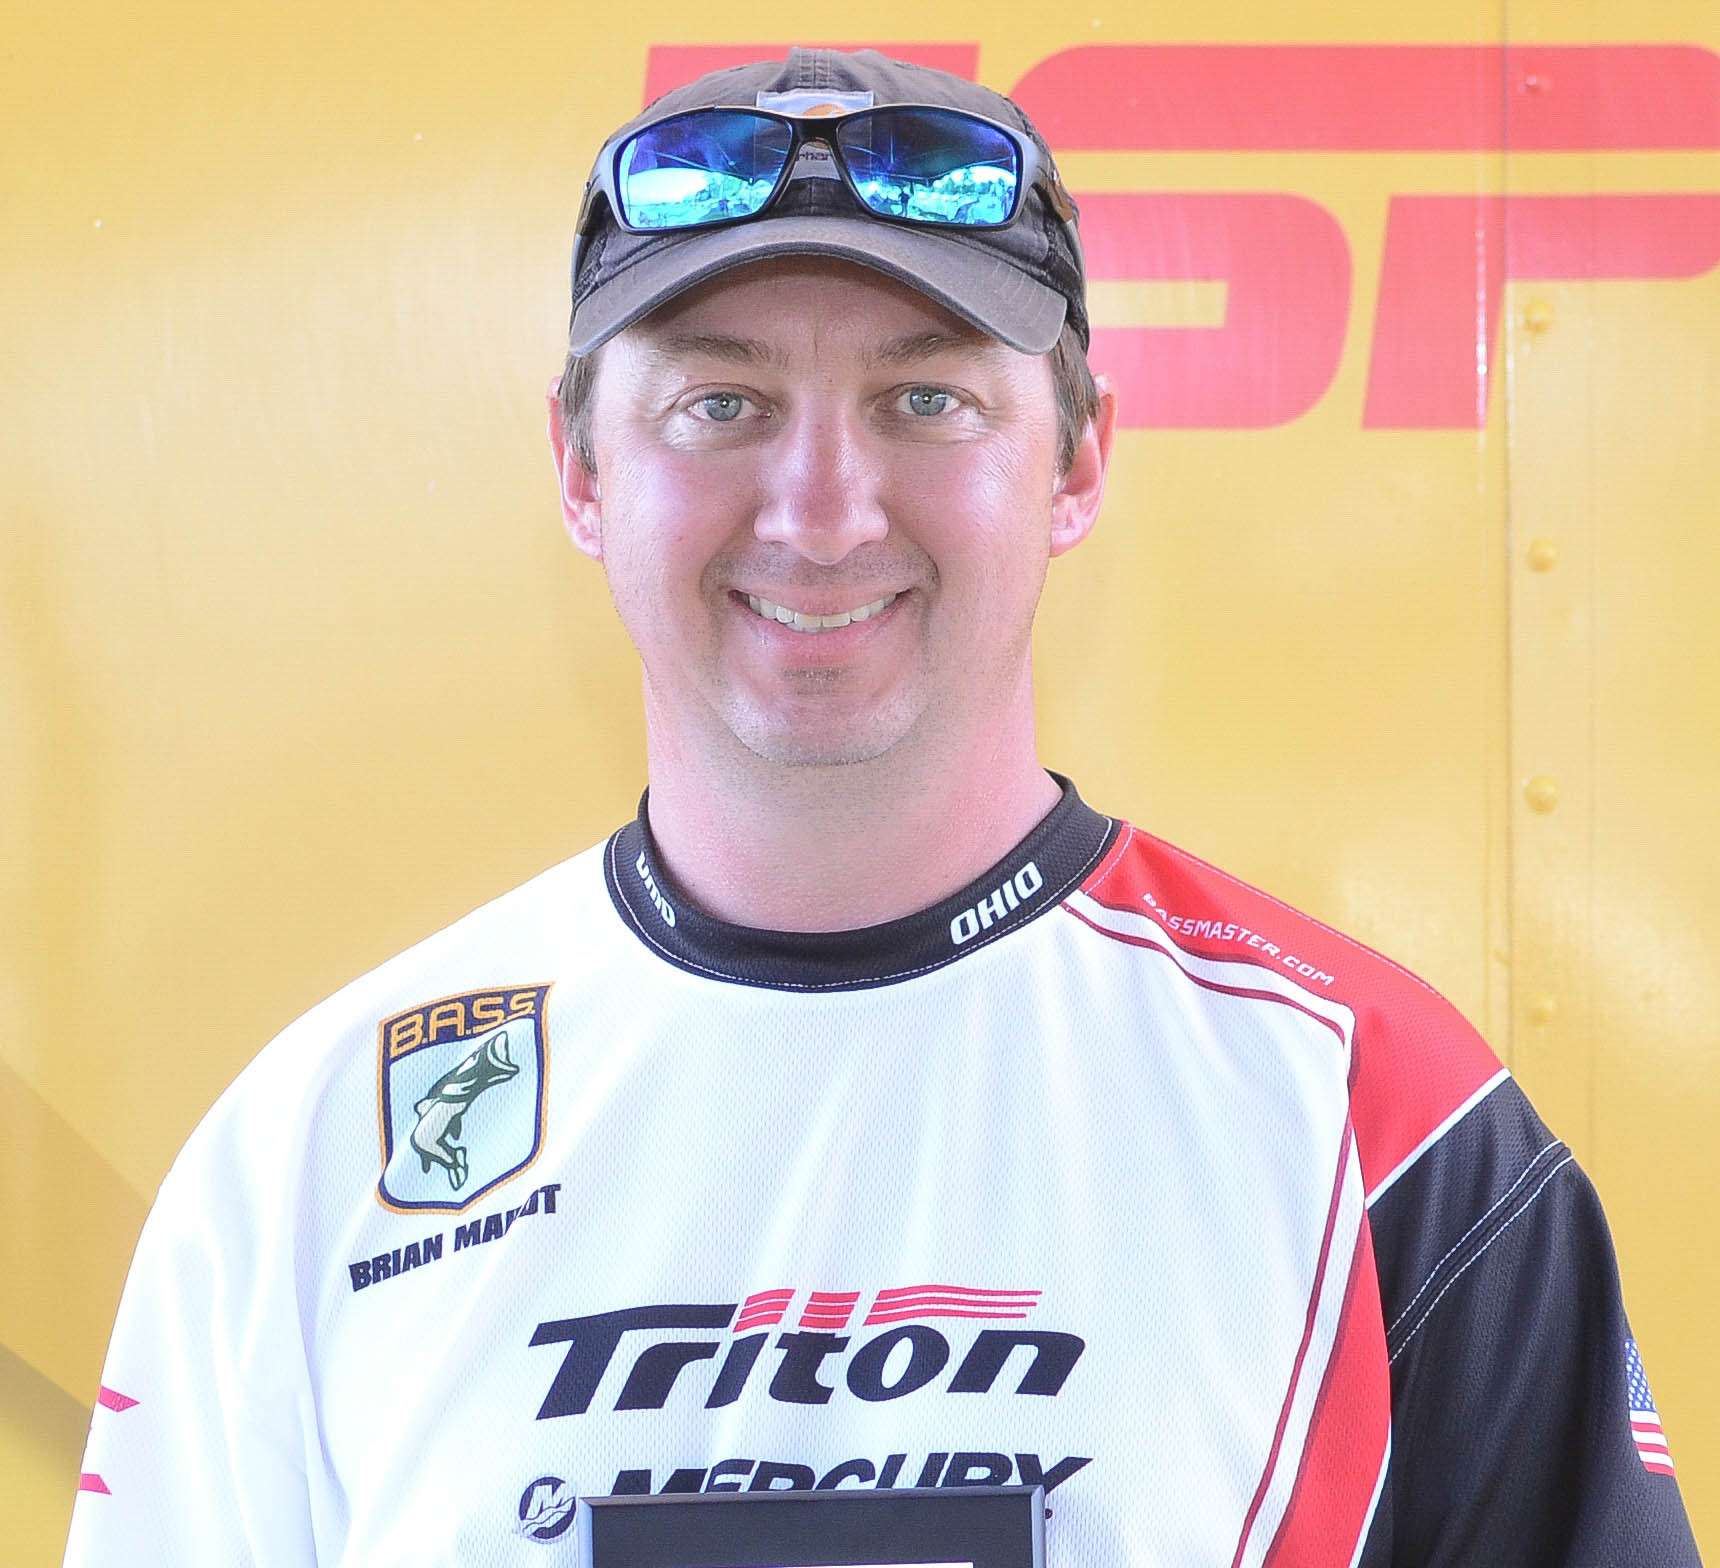 Brian Mailot <br>
Ohio Boater <br>
Brian Mailot is an Out Cast Bassmasters member from Ohio. He works as a hydrologic technician at the U.S. Geological Survey. He made it to the championship once before, in 2010. He has lots of interests, from hunting, archery and golf to snowboarding and bowling. He also likes watching sports. Mailot is sponsored by Ohio B.A.S.S. Nation, Out Cast Bassmasters and Cool Drain Flow Inc. 